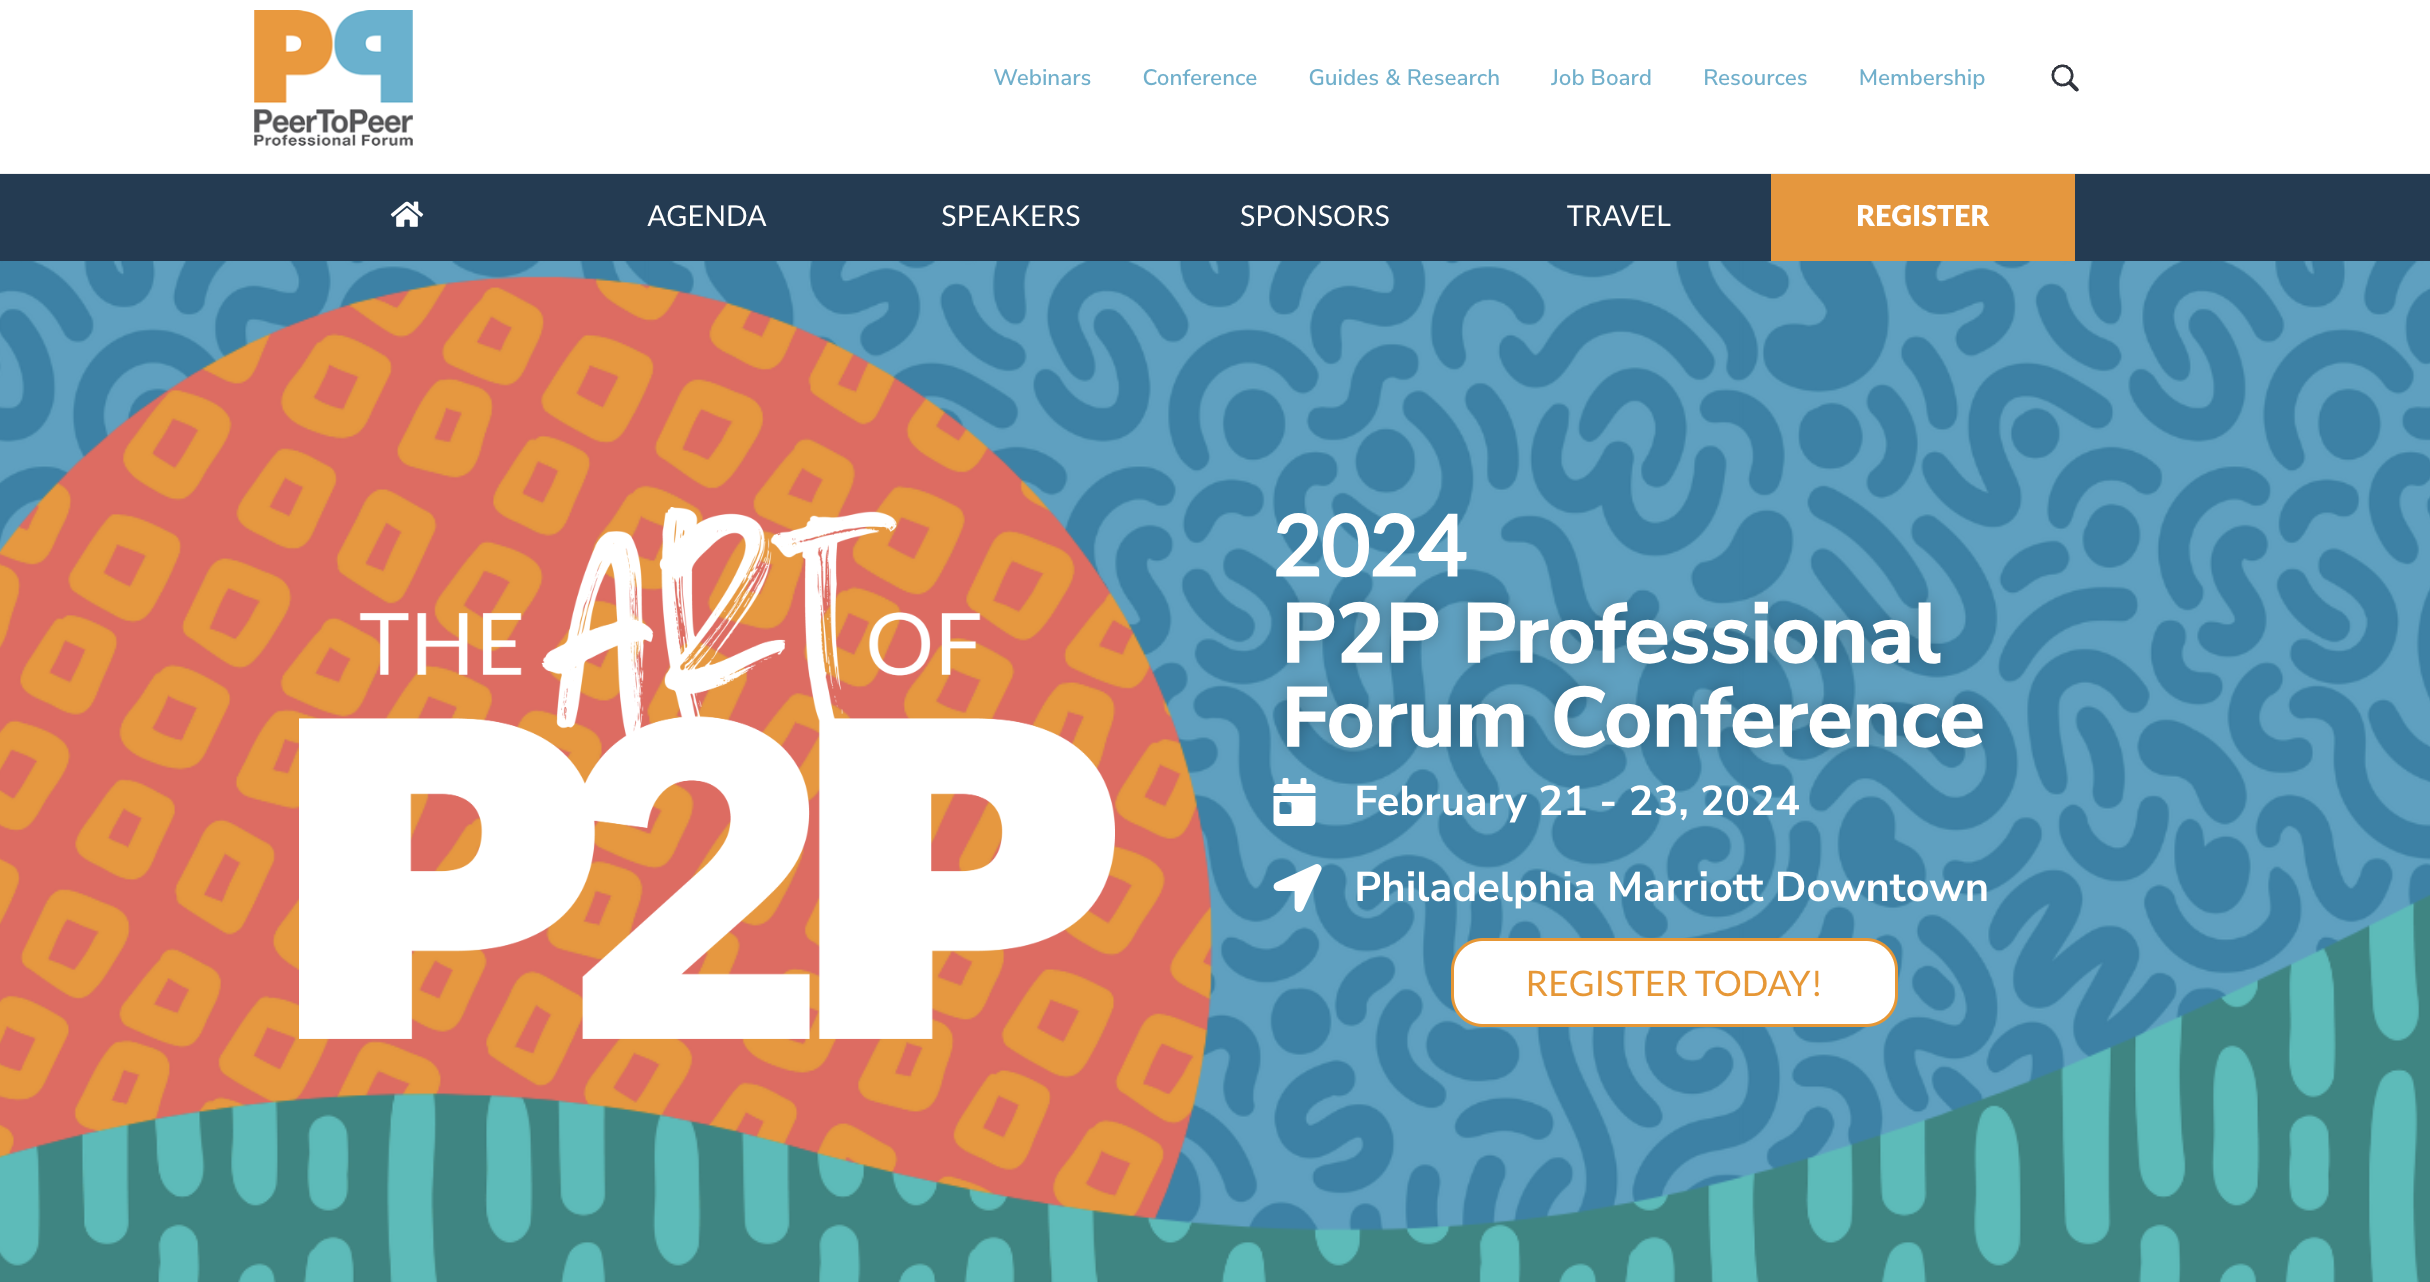 The P2P Professional Forum Conference's website homepage. 